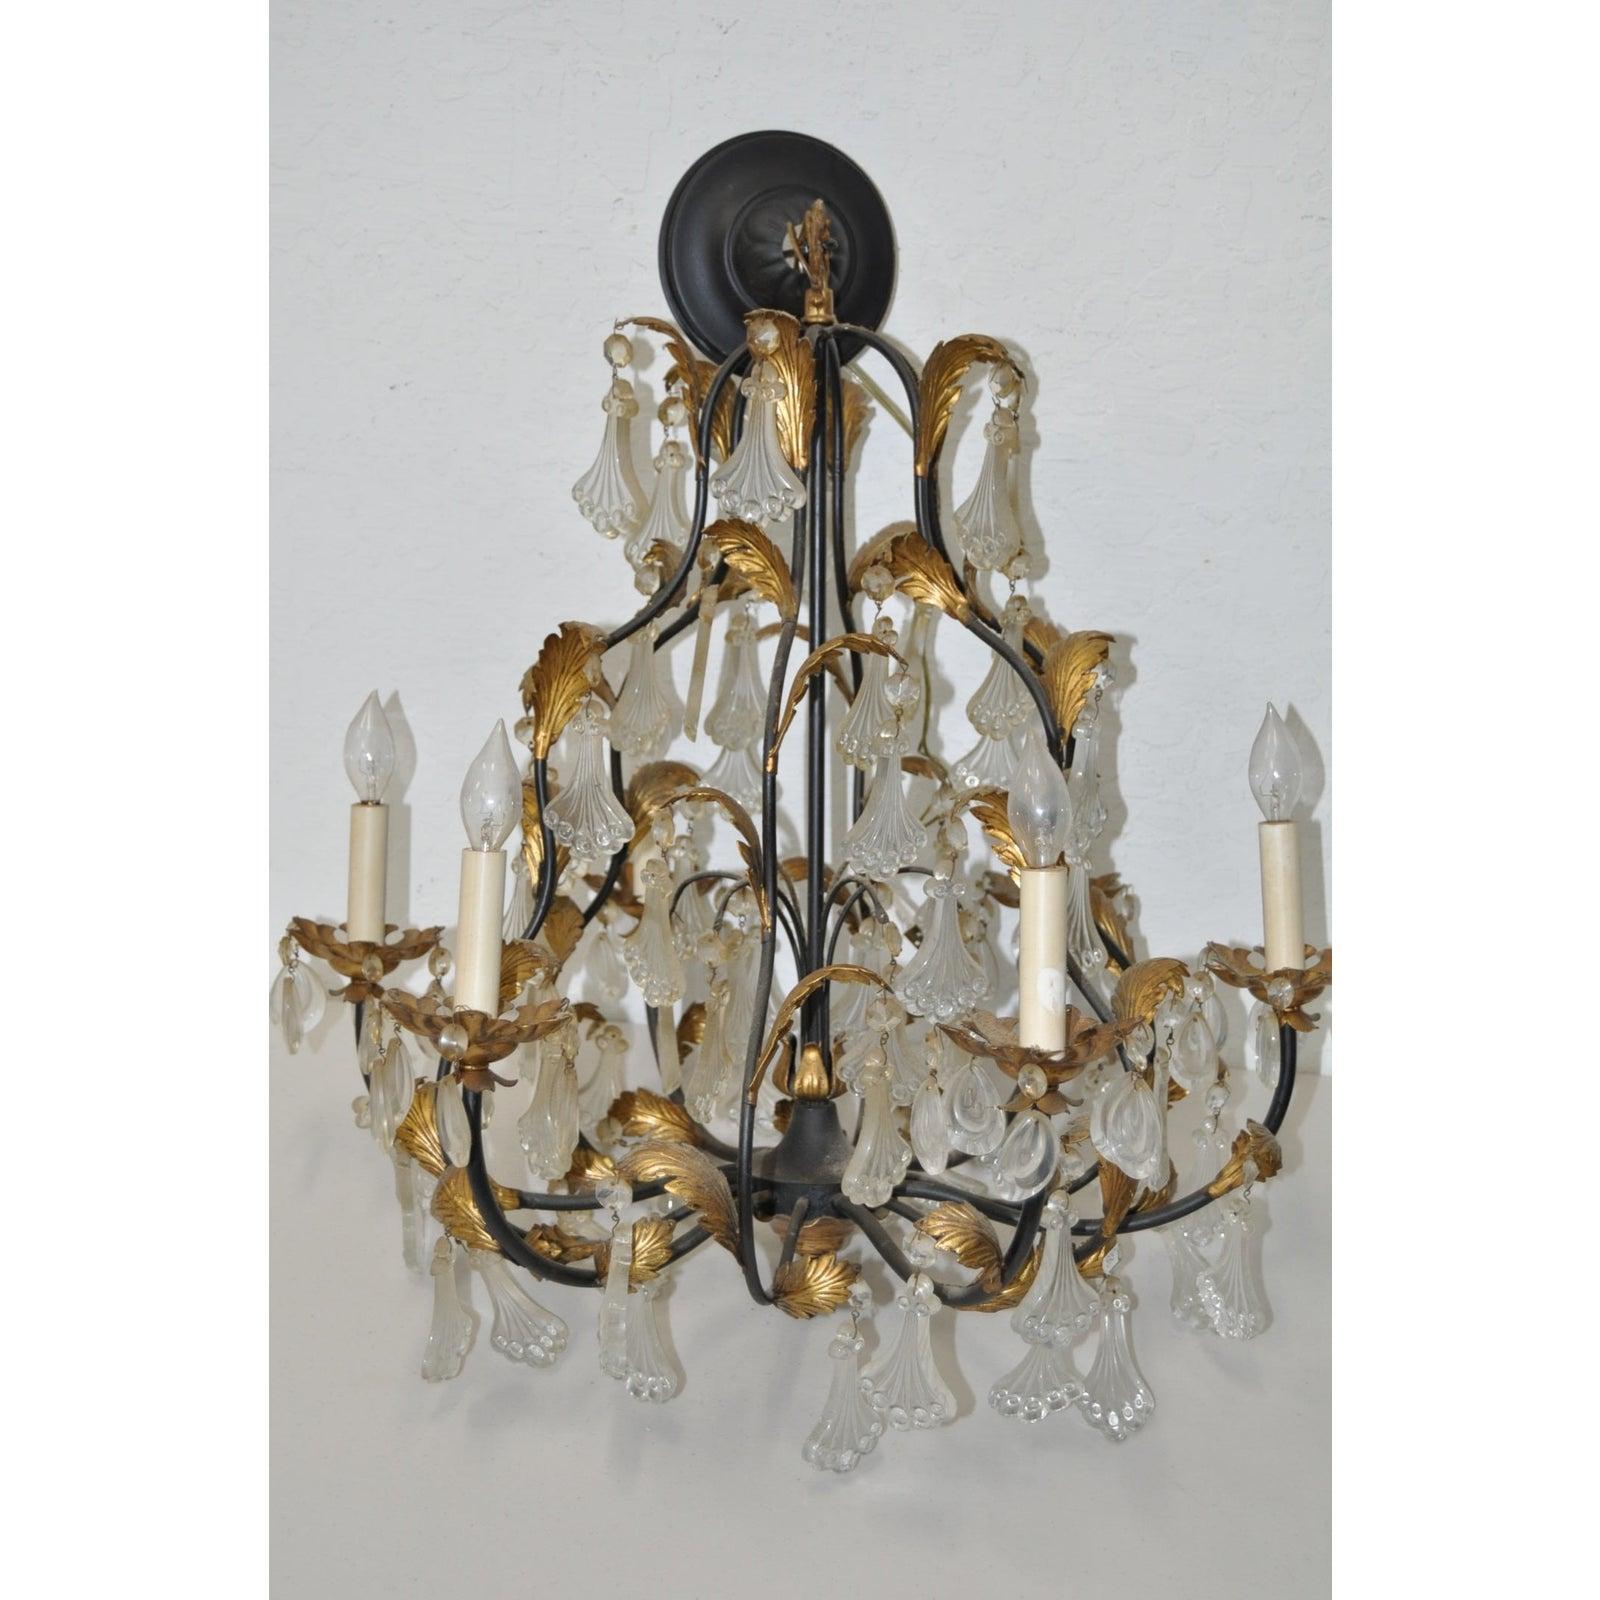 Vintage molded glass and gilded iron leaves chandelier, 1940s

Beautiful six-light chandelier with molded glass crystals and gilded iron leaves

Vintage wiring

Dimensions: 22